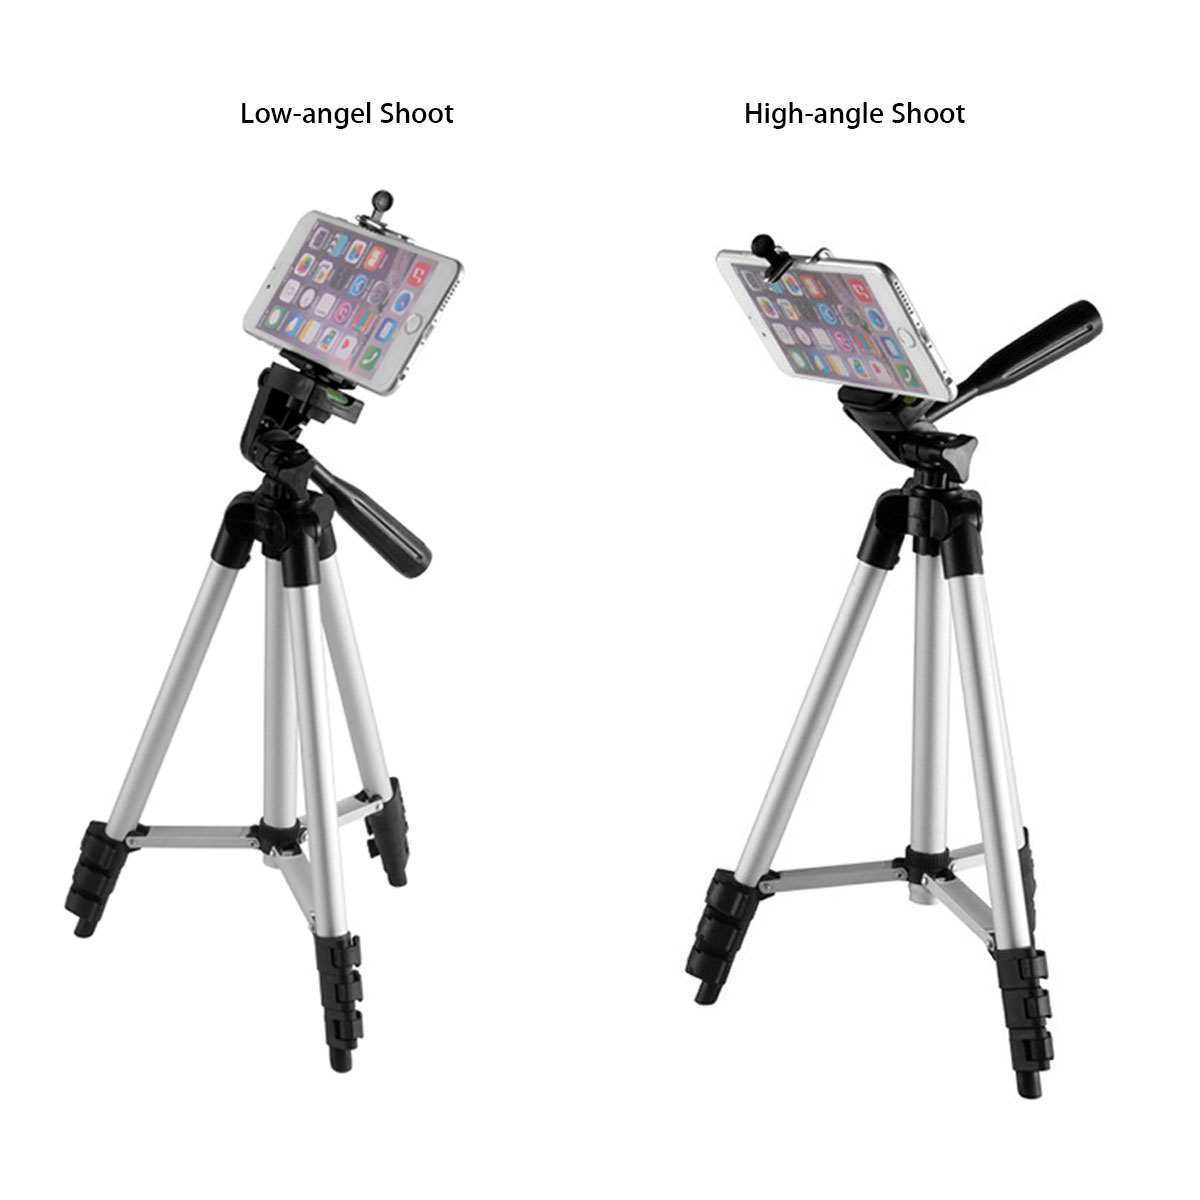 Bakeey-Professional-Camera-Adjustable-Tripod-Stand-Holder-Live-Selfie-Stick-for-iPhone-8-Plus-X-S8-S-1134052-4